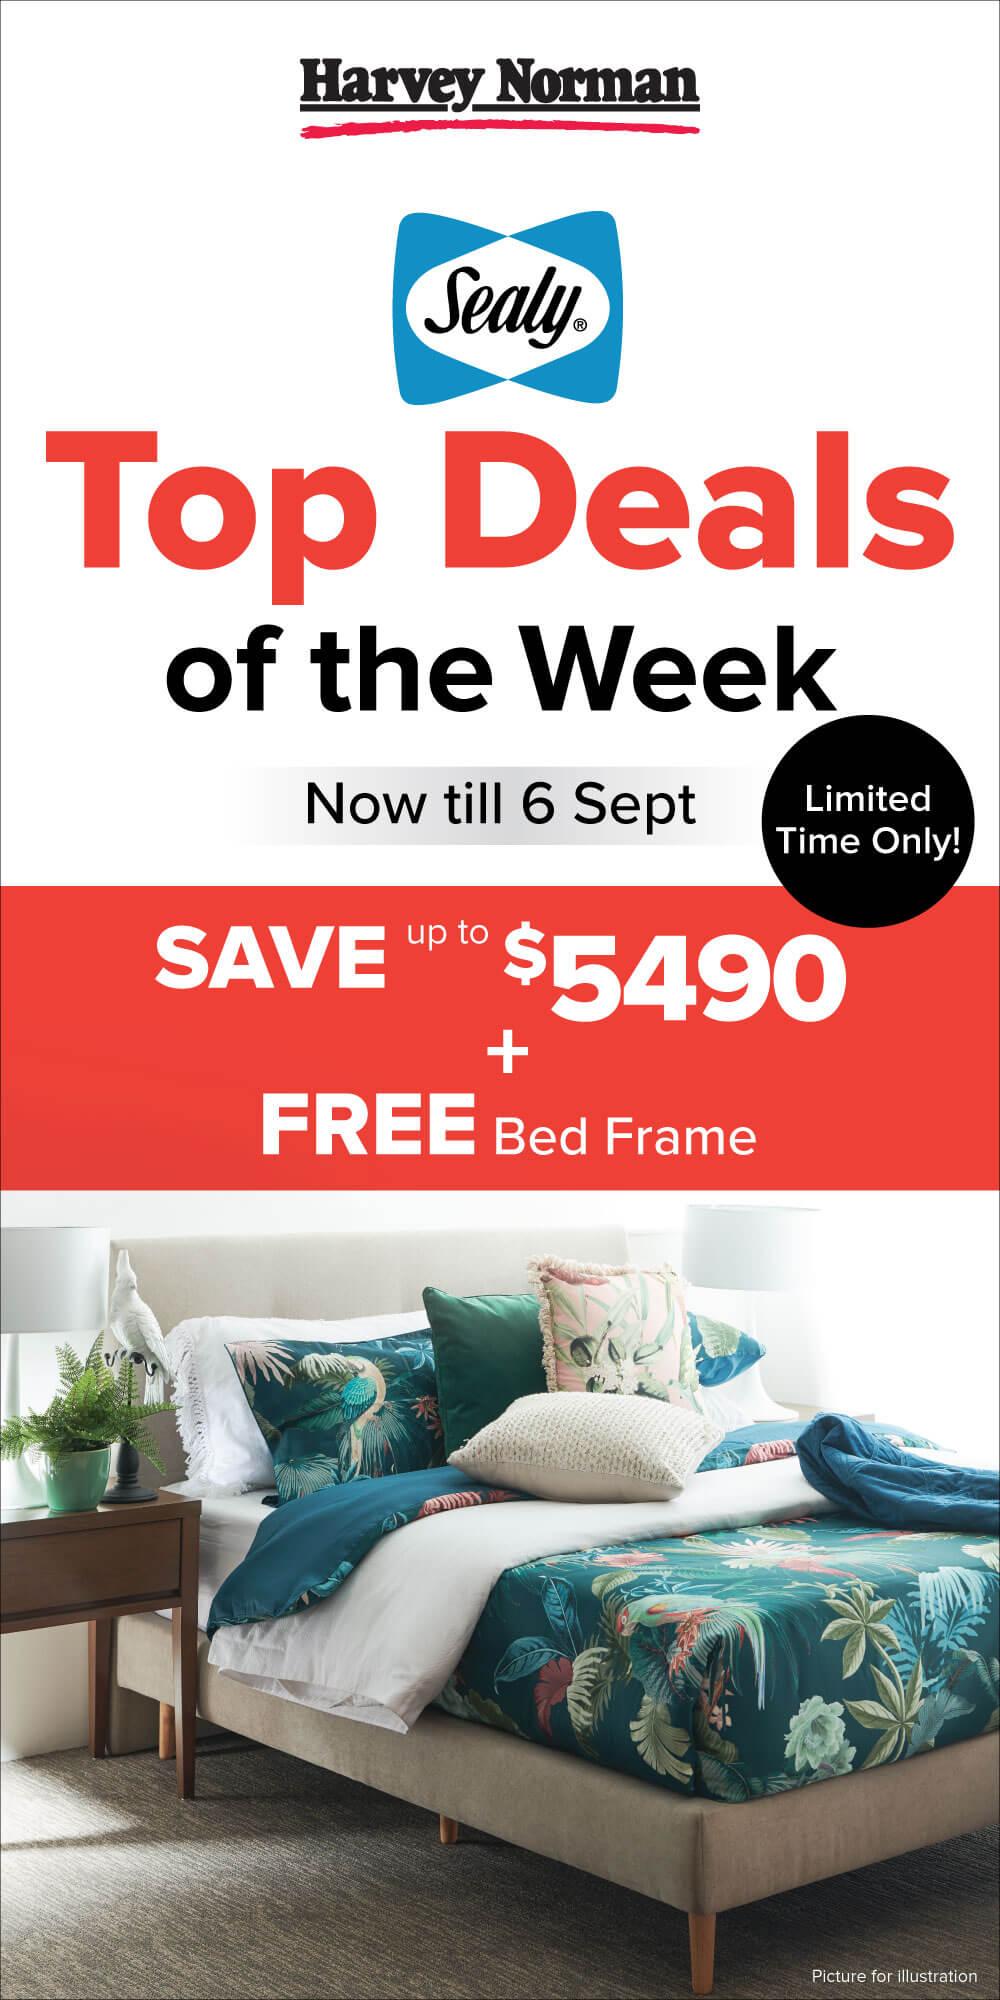 Sealy Free Bed Frame Promotion at Harvey Norman Till 06 Sept